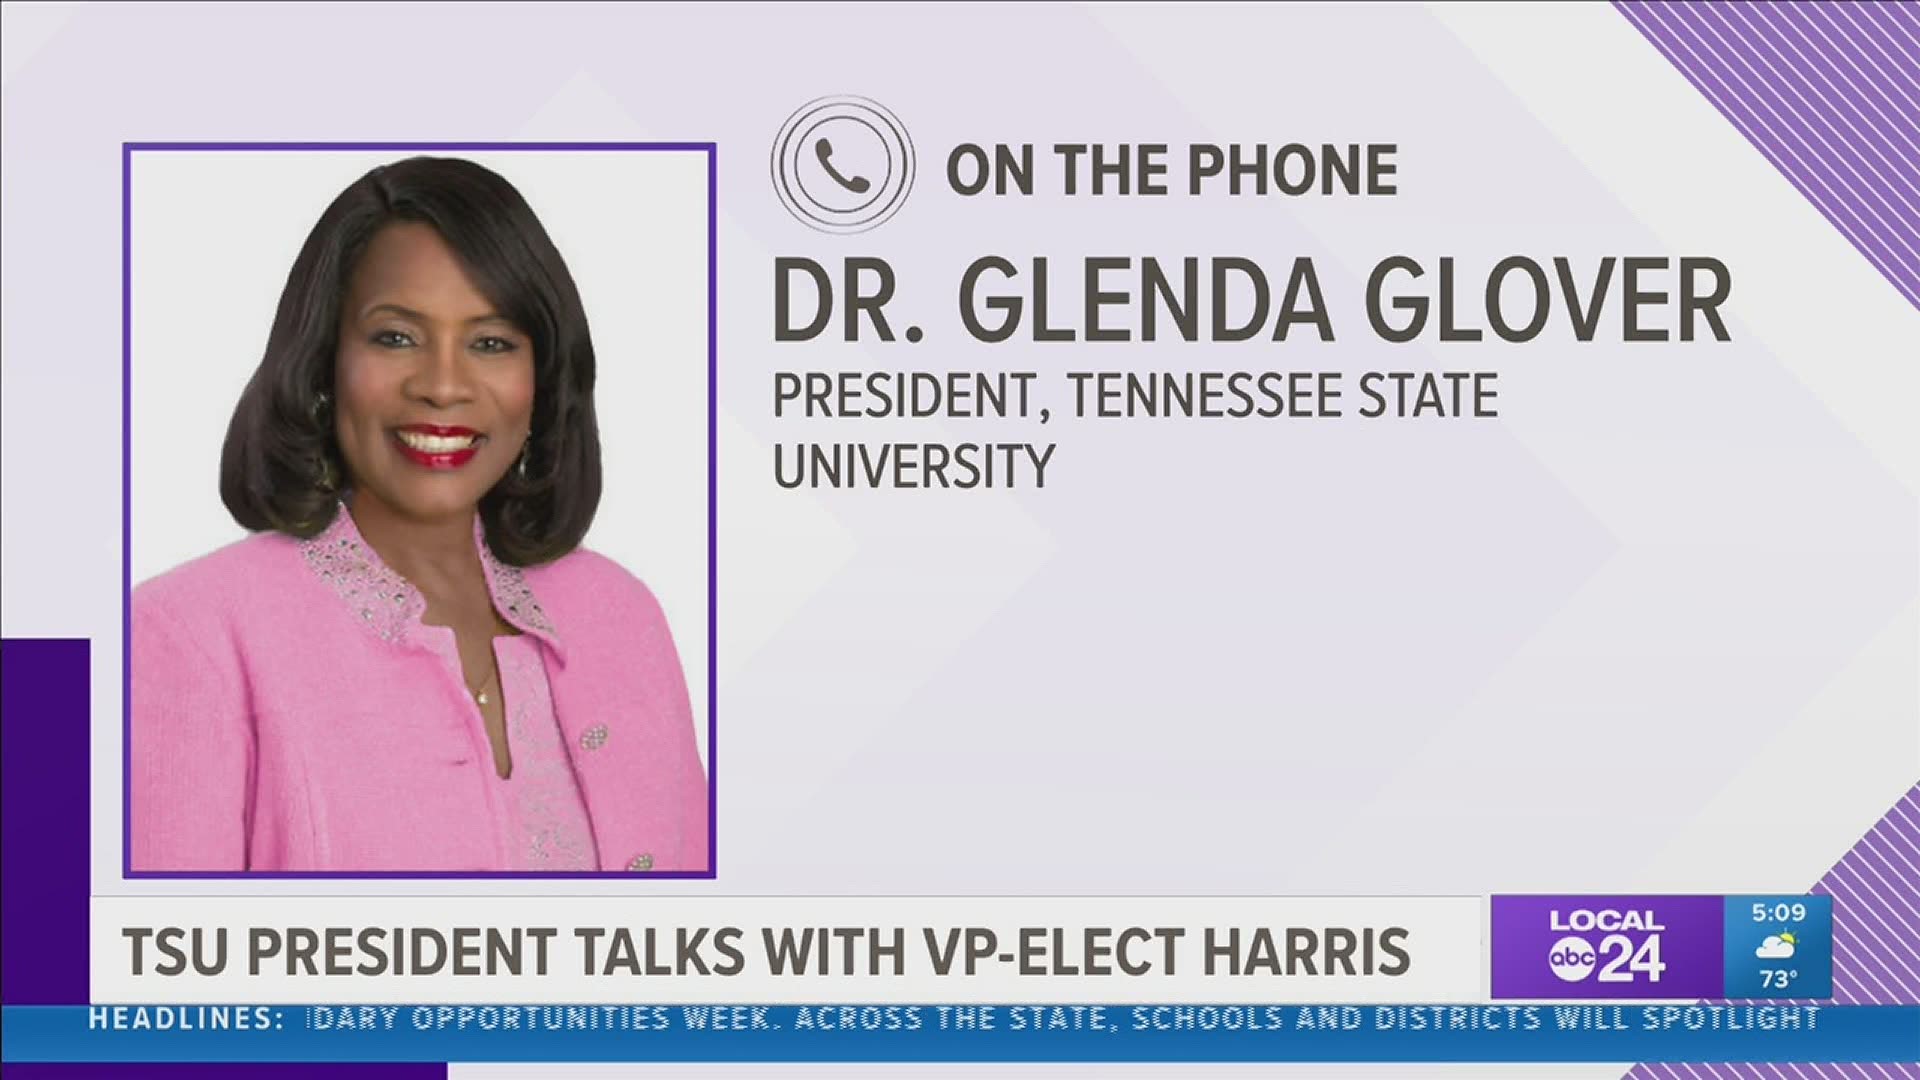 Kamala Harris called Tennessee State University President and International President and CEO of Alpha Kappa Alpha Sorority, Incorporated Dr. Glenda Glover.